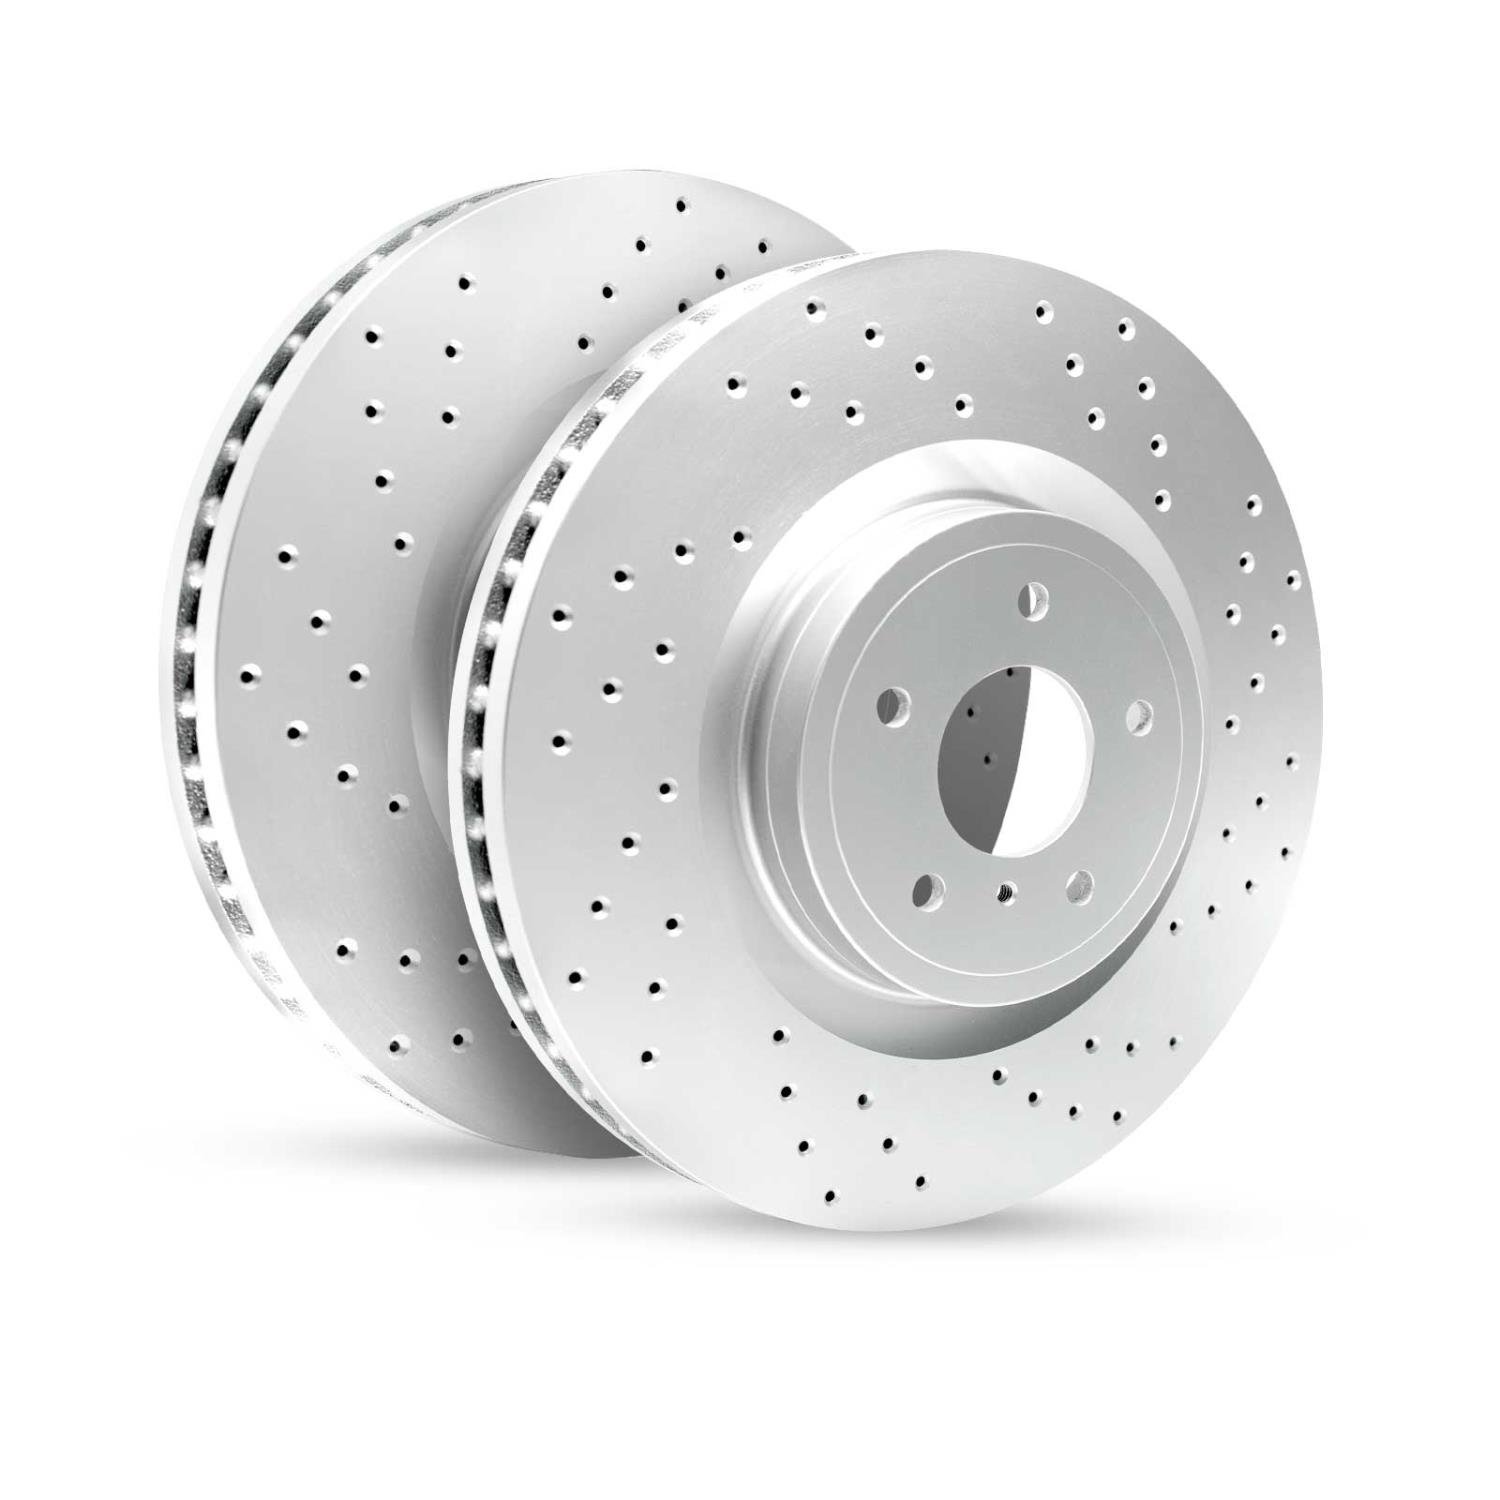 GEO-Carbon Drilled/Slotted Rotors, 2001-2009 Lexus/Toyota/Scion, Position: Rear